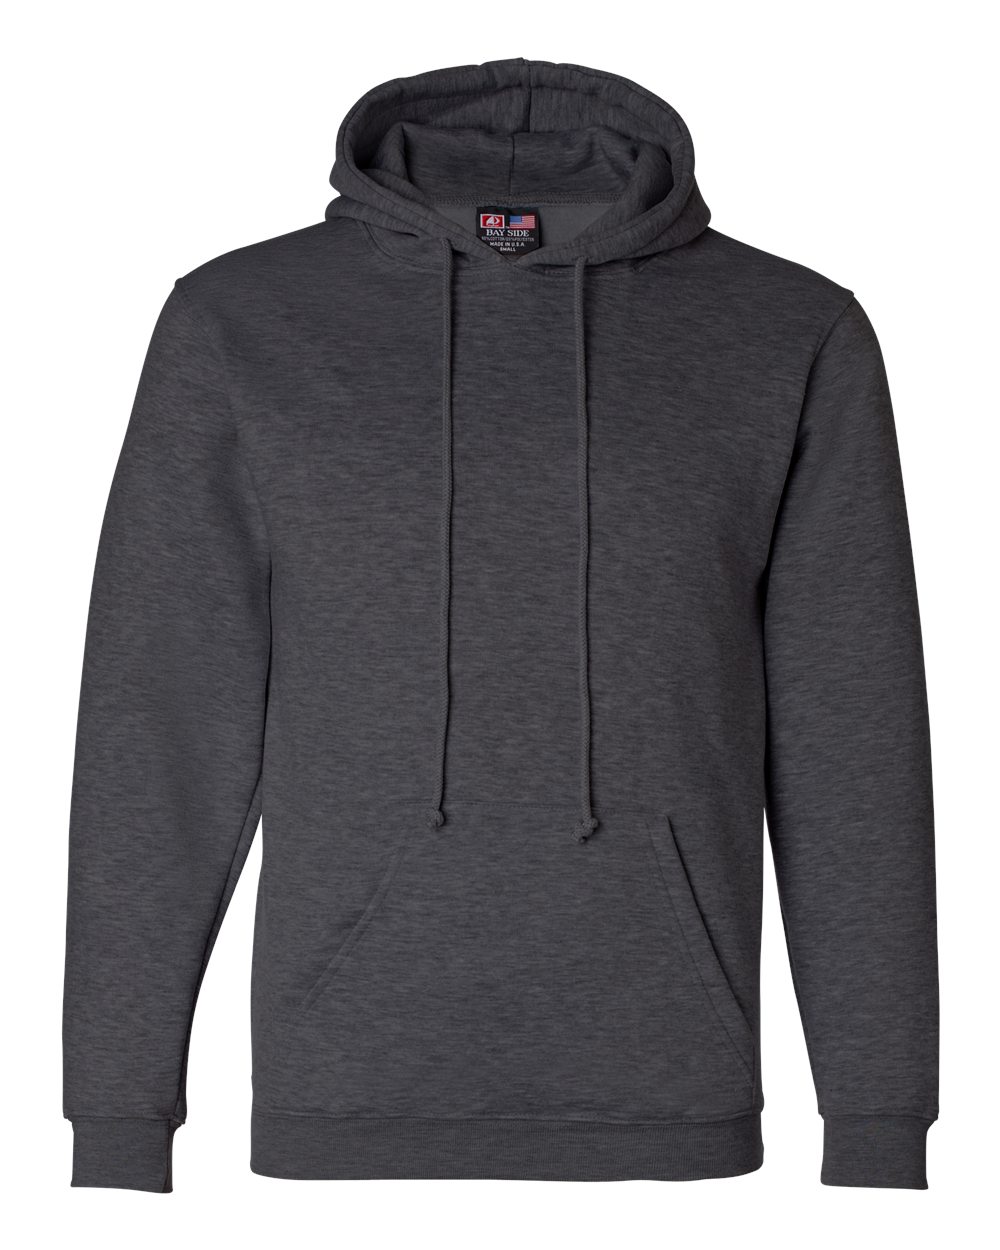 click to view charcoal heather